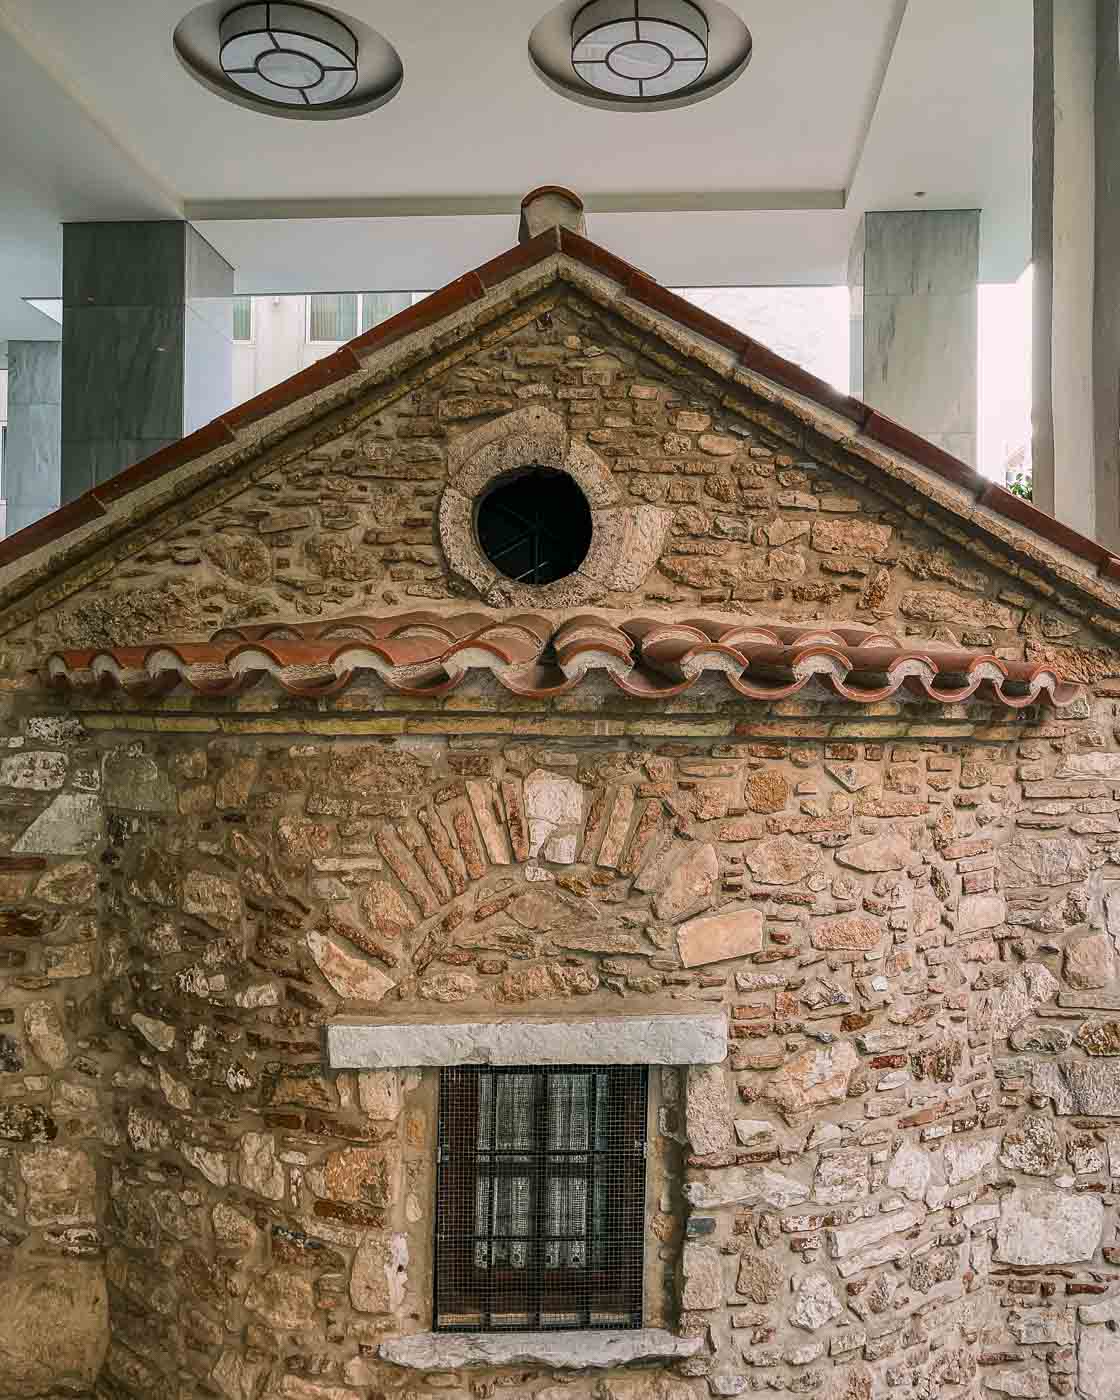 The Agia Dynamis Church is a small 16th-century hidden gem tucked away amidst modern buildings. I passed by it once, and it felt like a surreal movie set since the entire church is surrounded by a contemporary building, as you can see in the pictures here. 